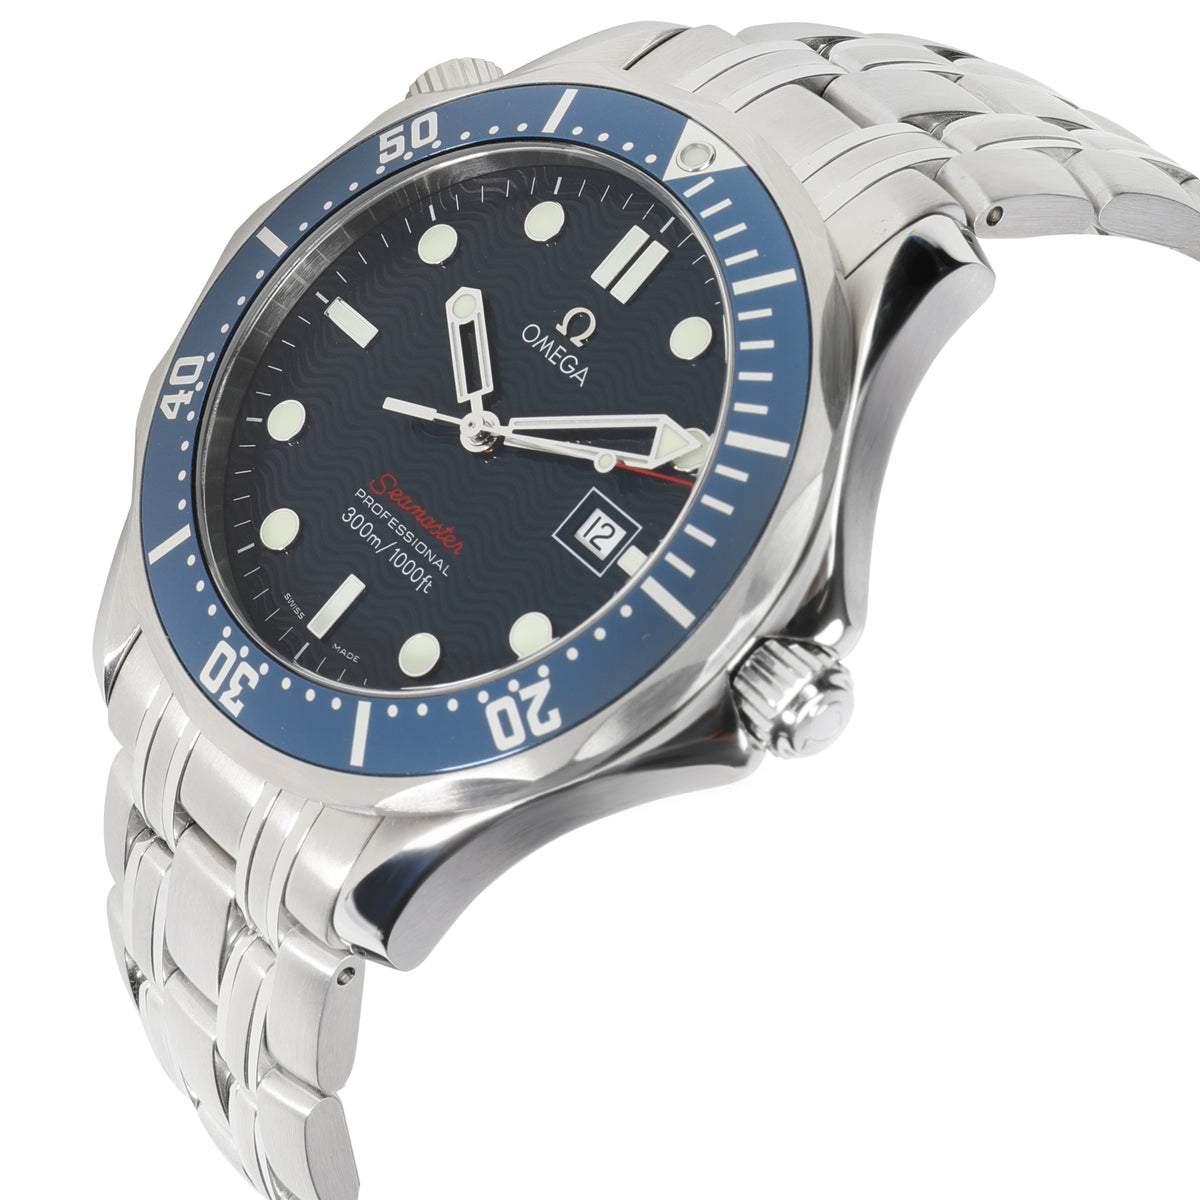 Omega Diver 300M 2221.80.00 Men's Watch in  Stainless Steel